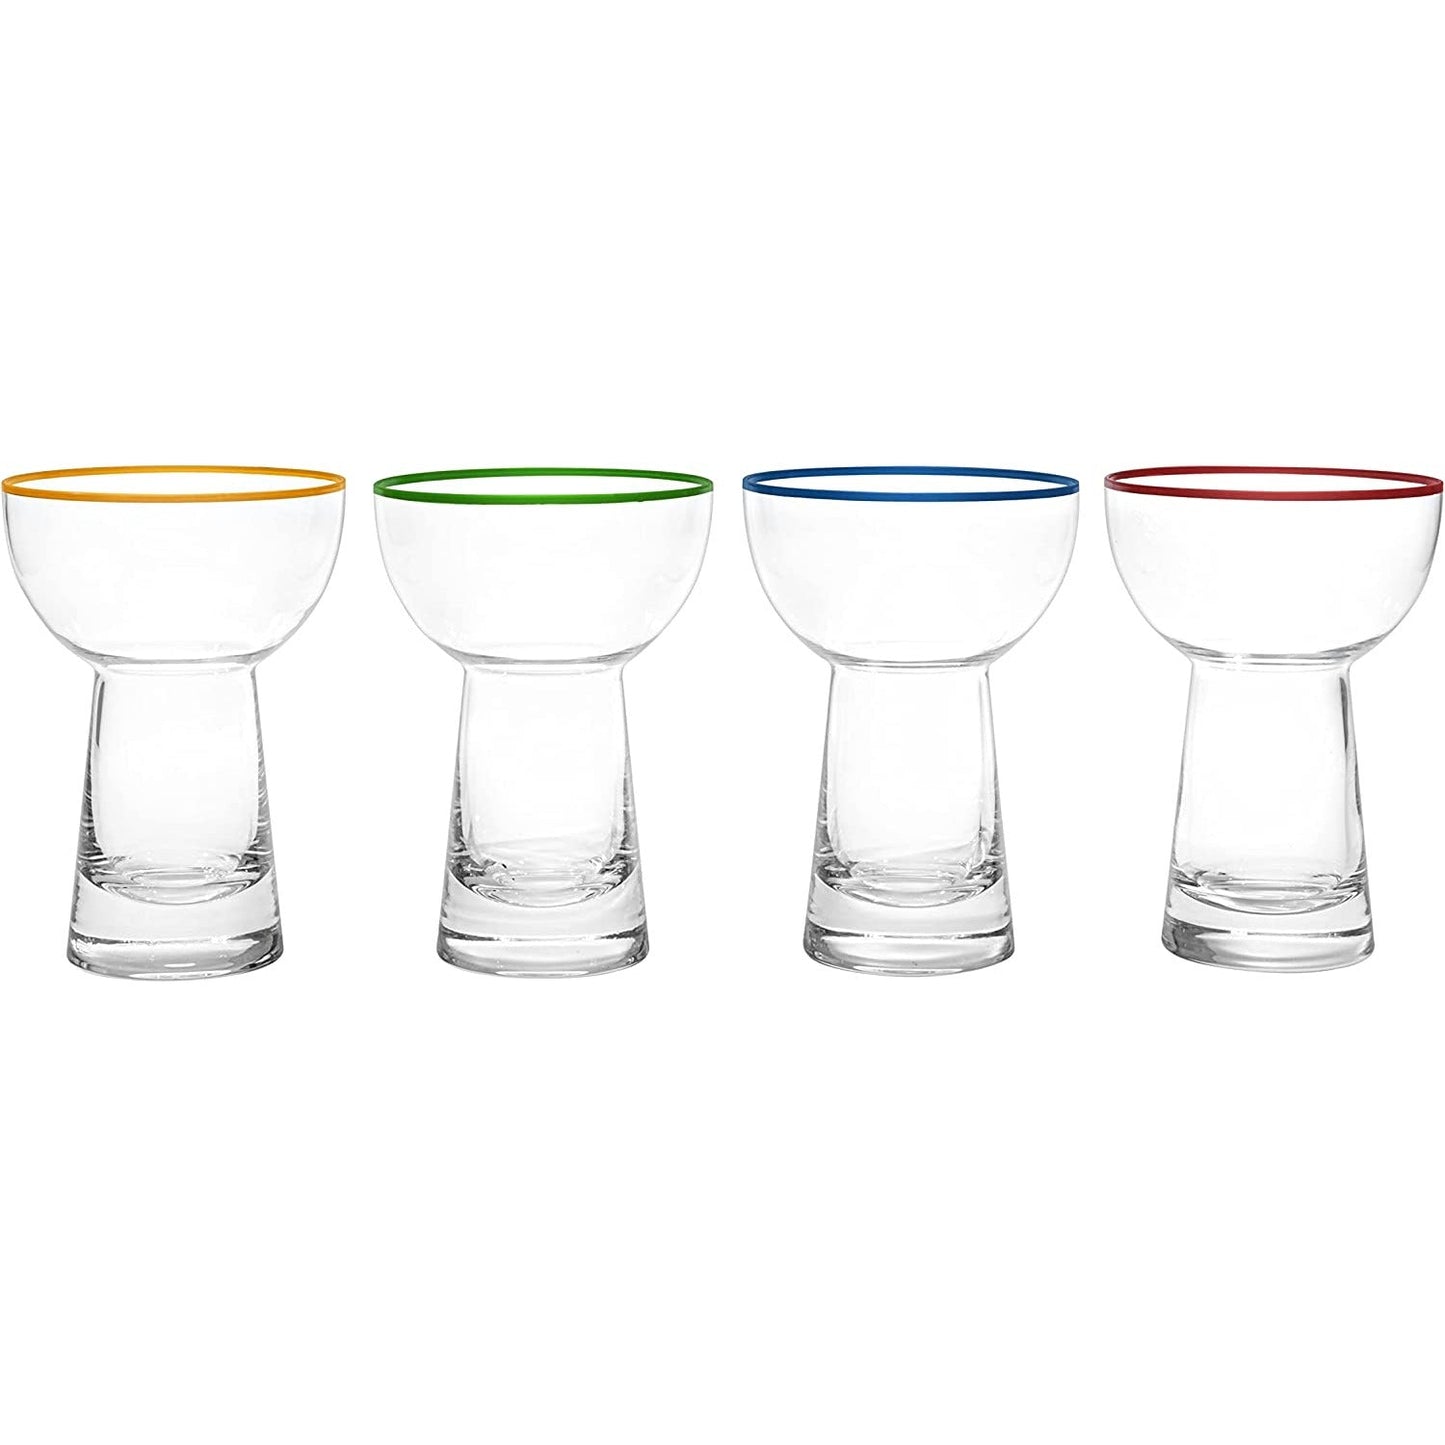 The Wine Savant - Stemless Margarita Glasses with Colored Party Rims - Set of 4 - 15oz